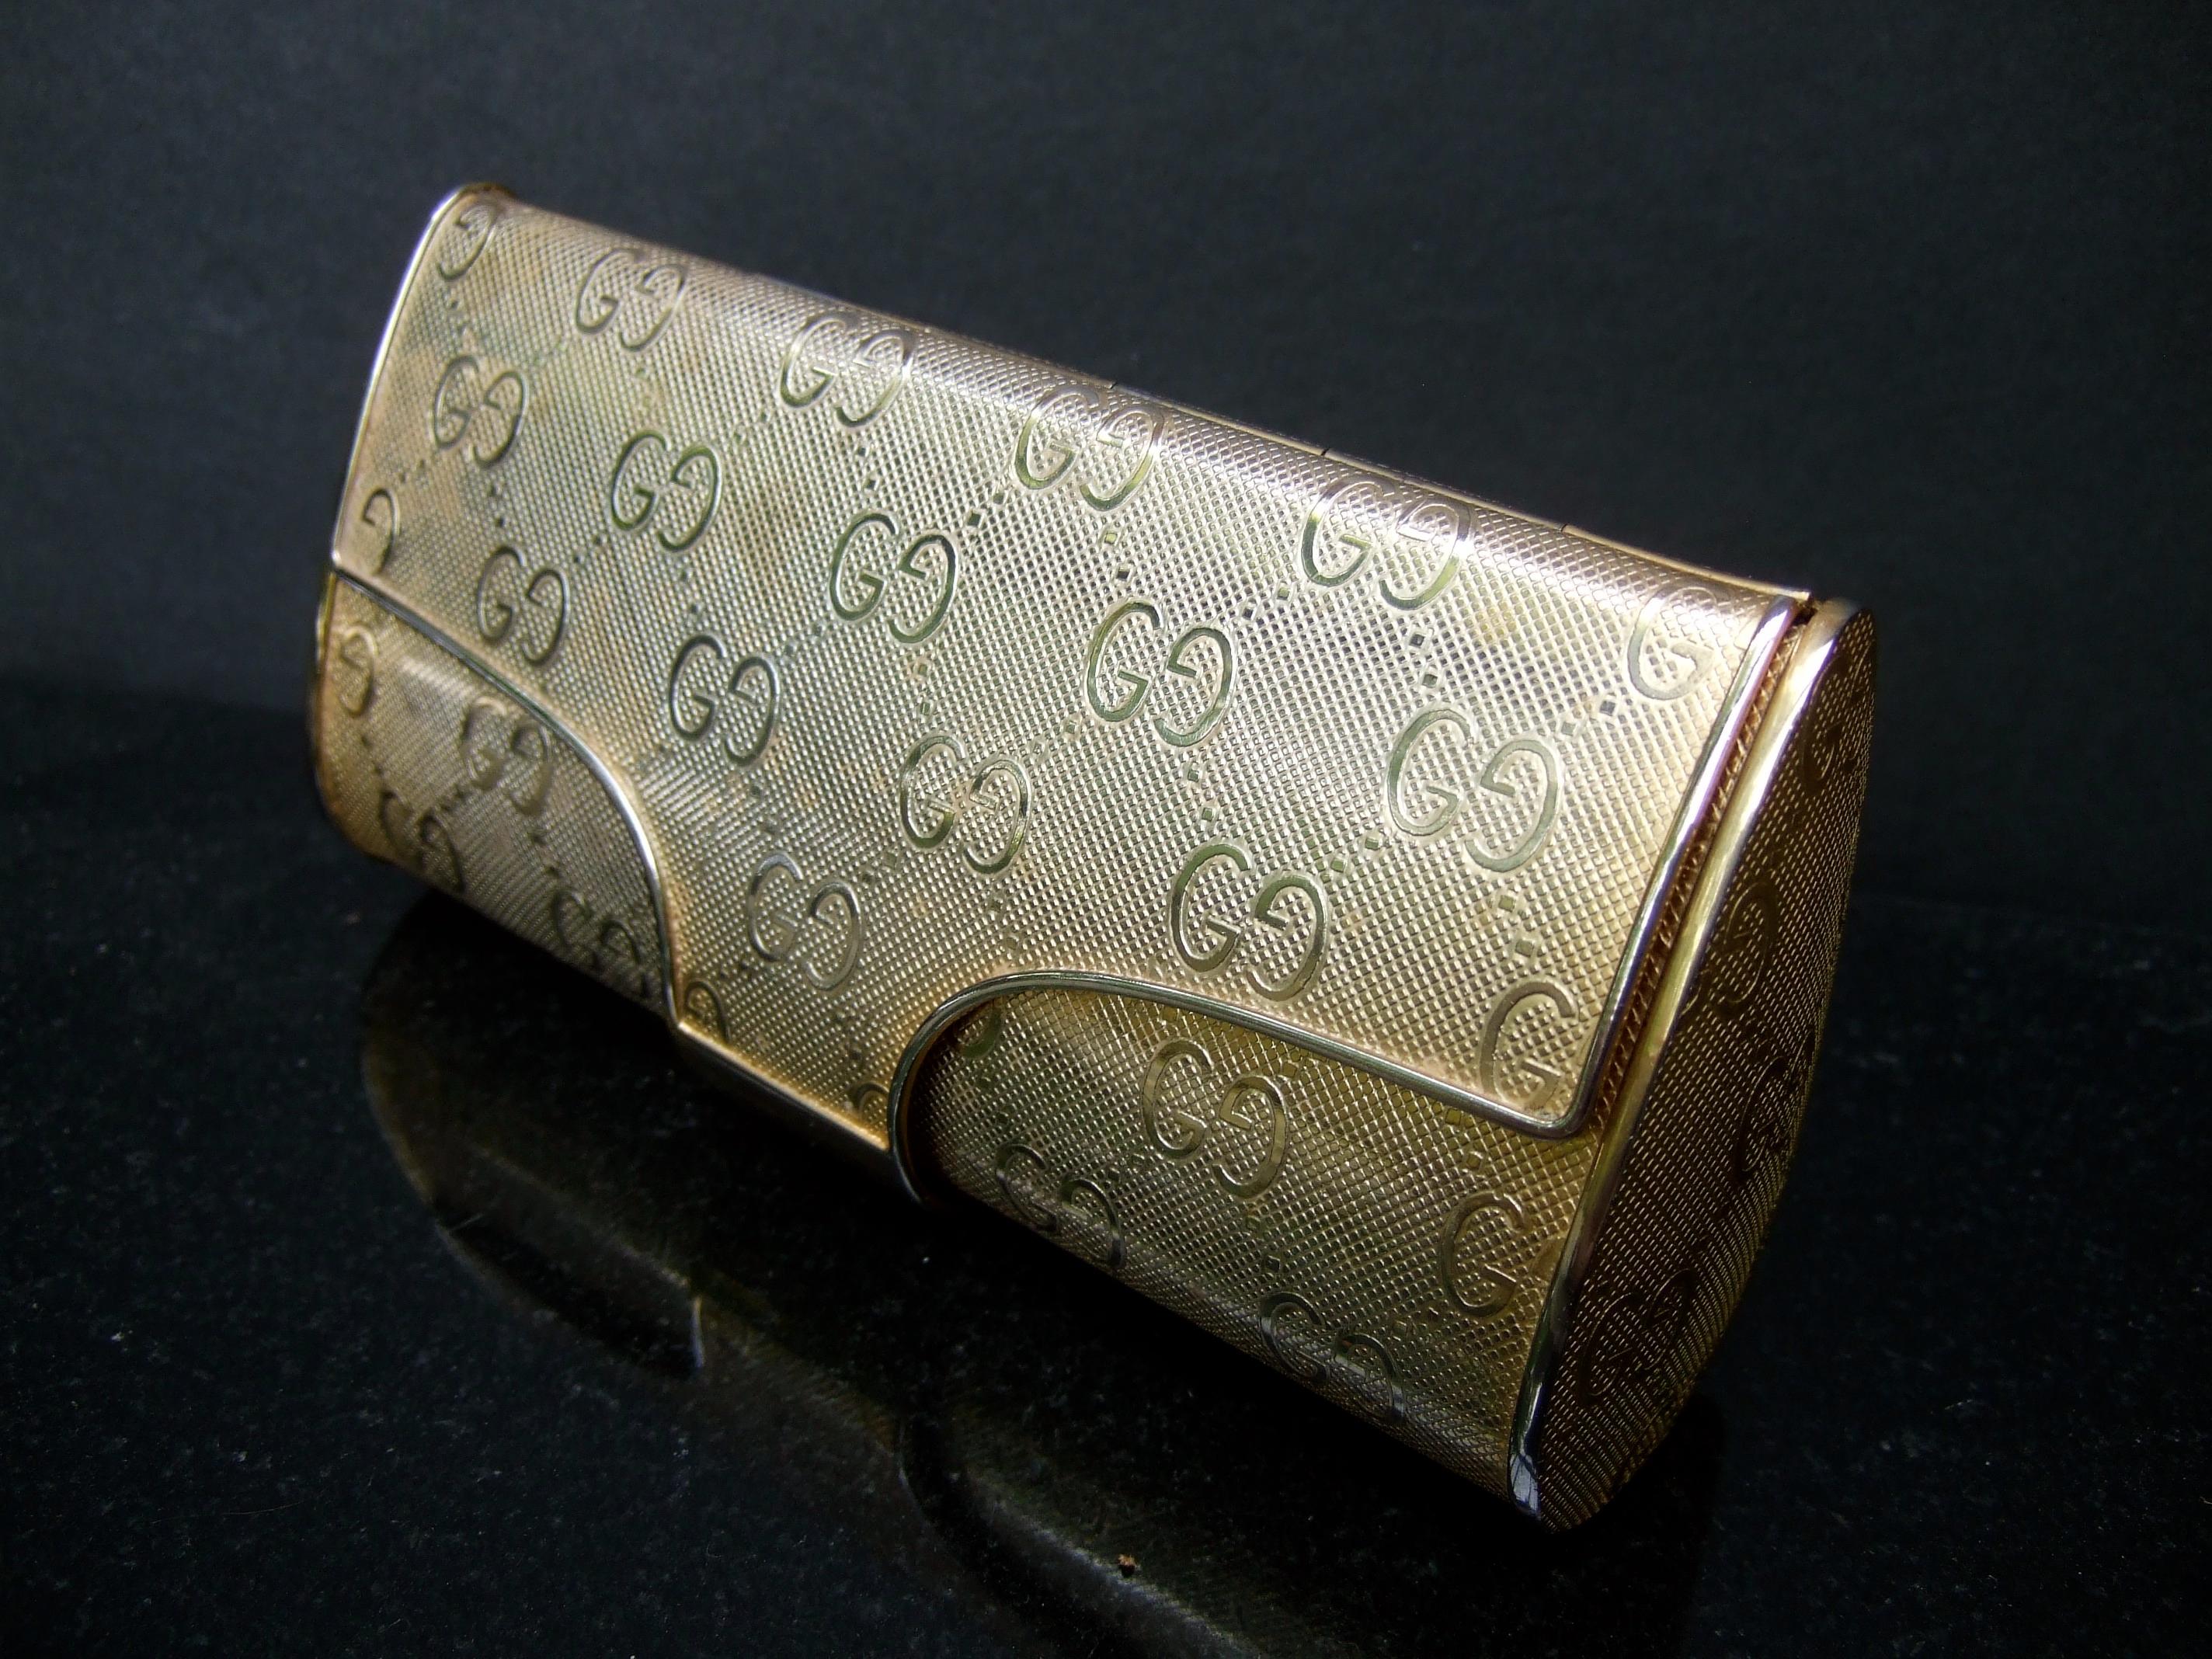 Gucci Italian rare gilt metal minaudiere' evening clutch c 1970s 
The elegant gold metal clutch is adorned with Gucci's G.G initials 
throughout the exterior

Makes a chic timeless accessory perfect for holidays & weddings 
The interior is designed